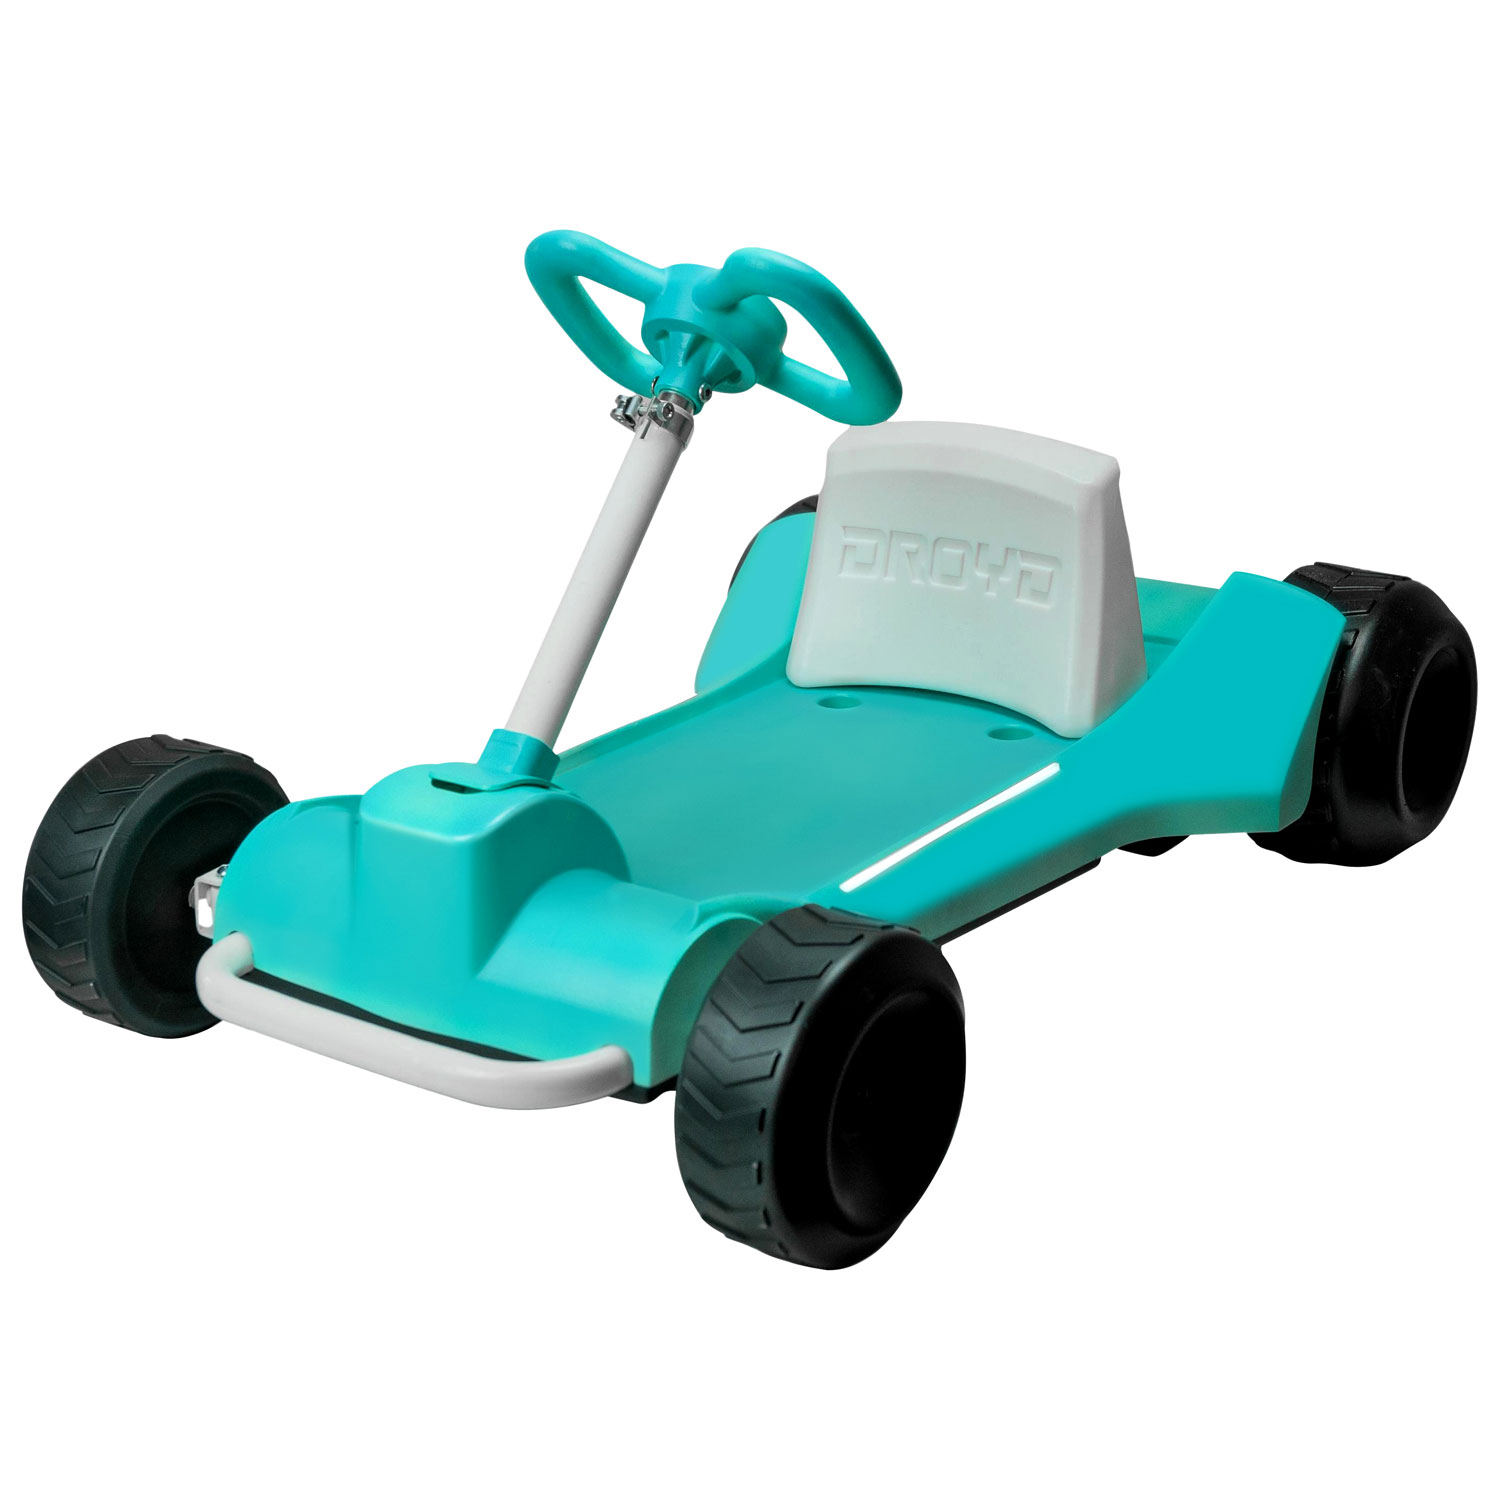 Dryod Zypster Electric Ride-On Go Kart - Ages 3-6 Years - Teal